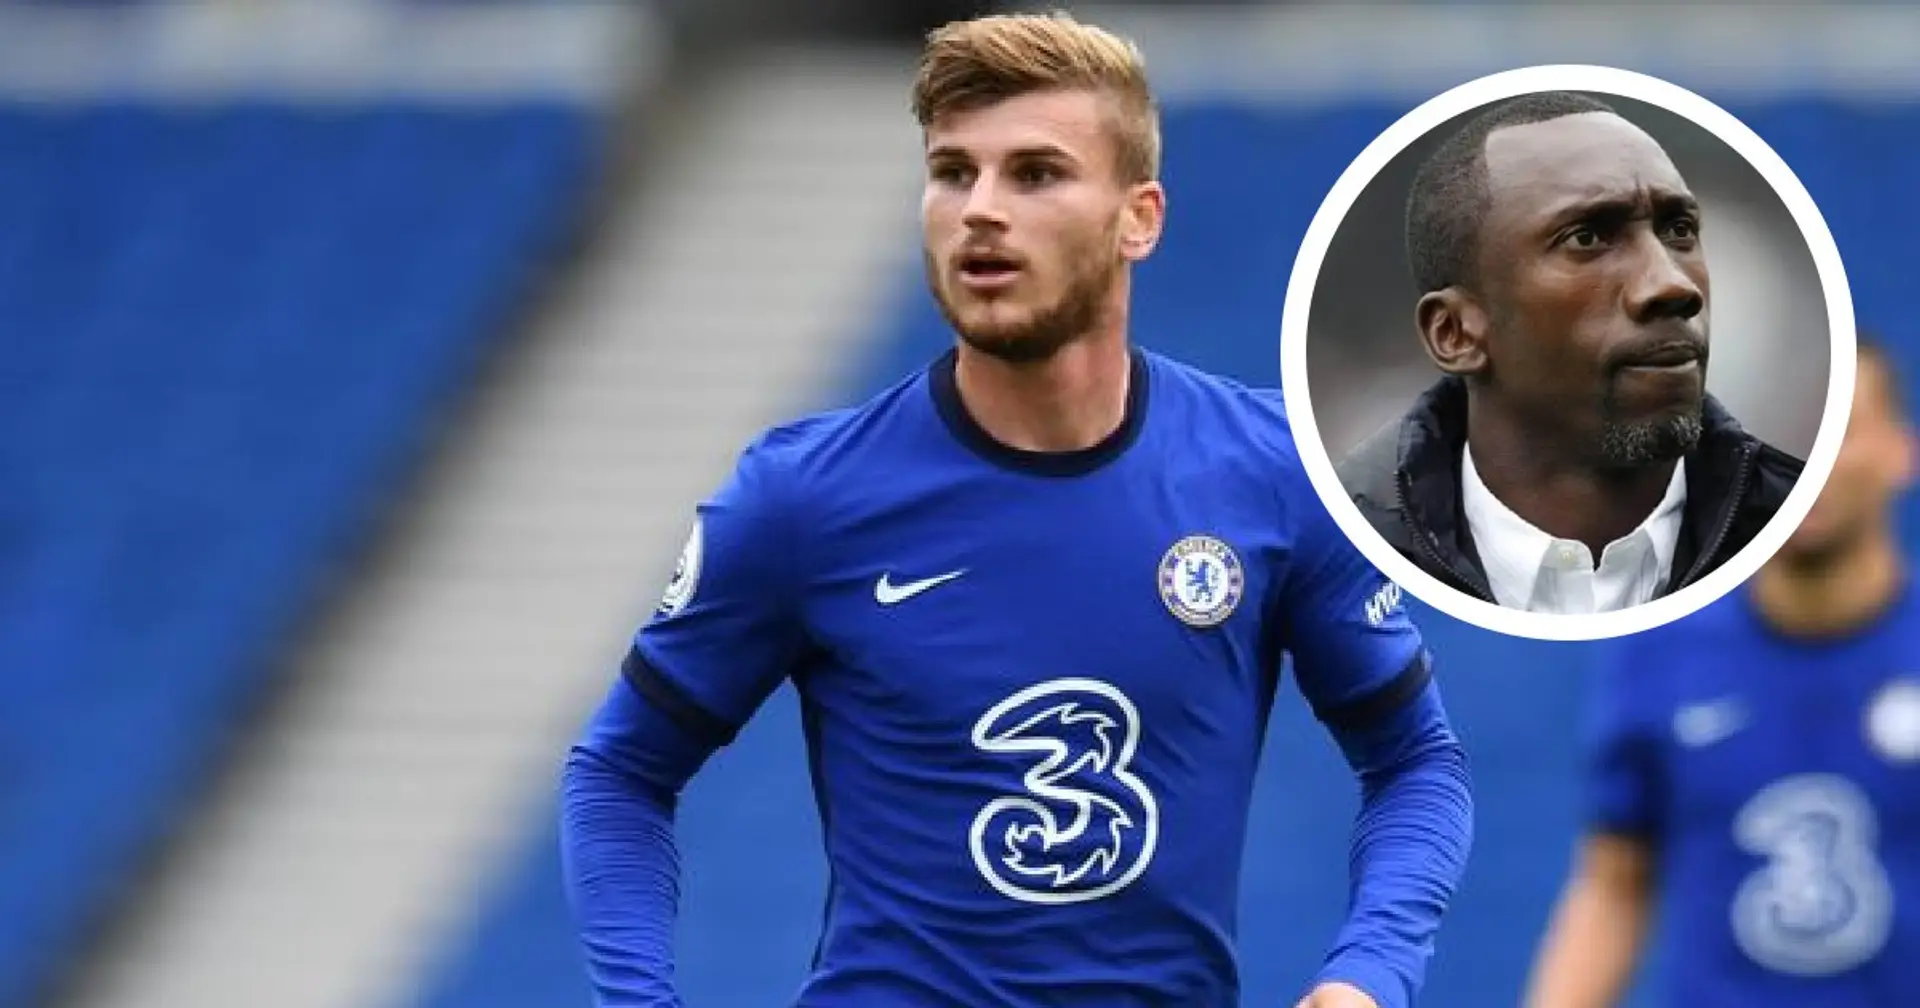 Jimmy Floyd Hasselbaink gives 3 reasons why Werner gives Chelsea 'an extra edge' in front of goal